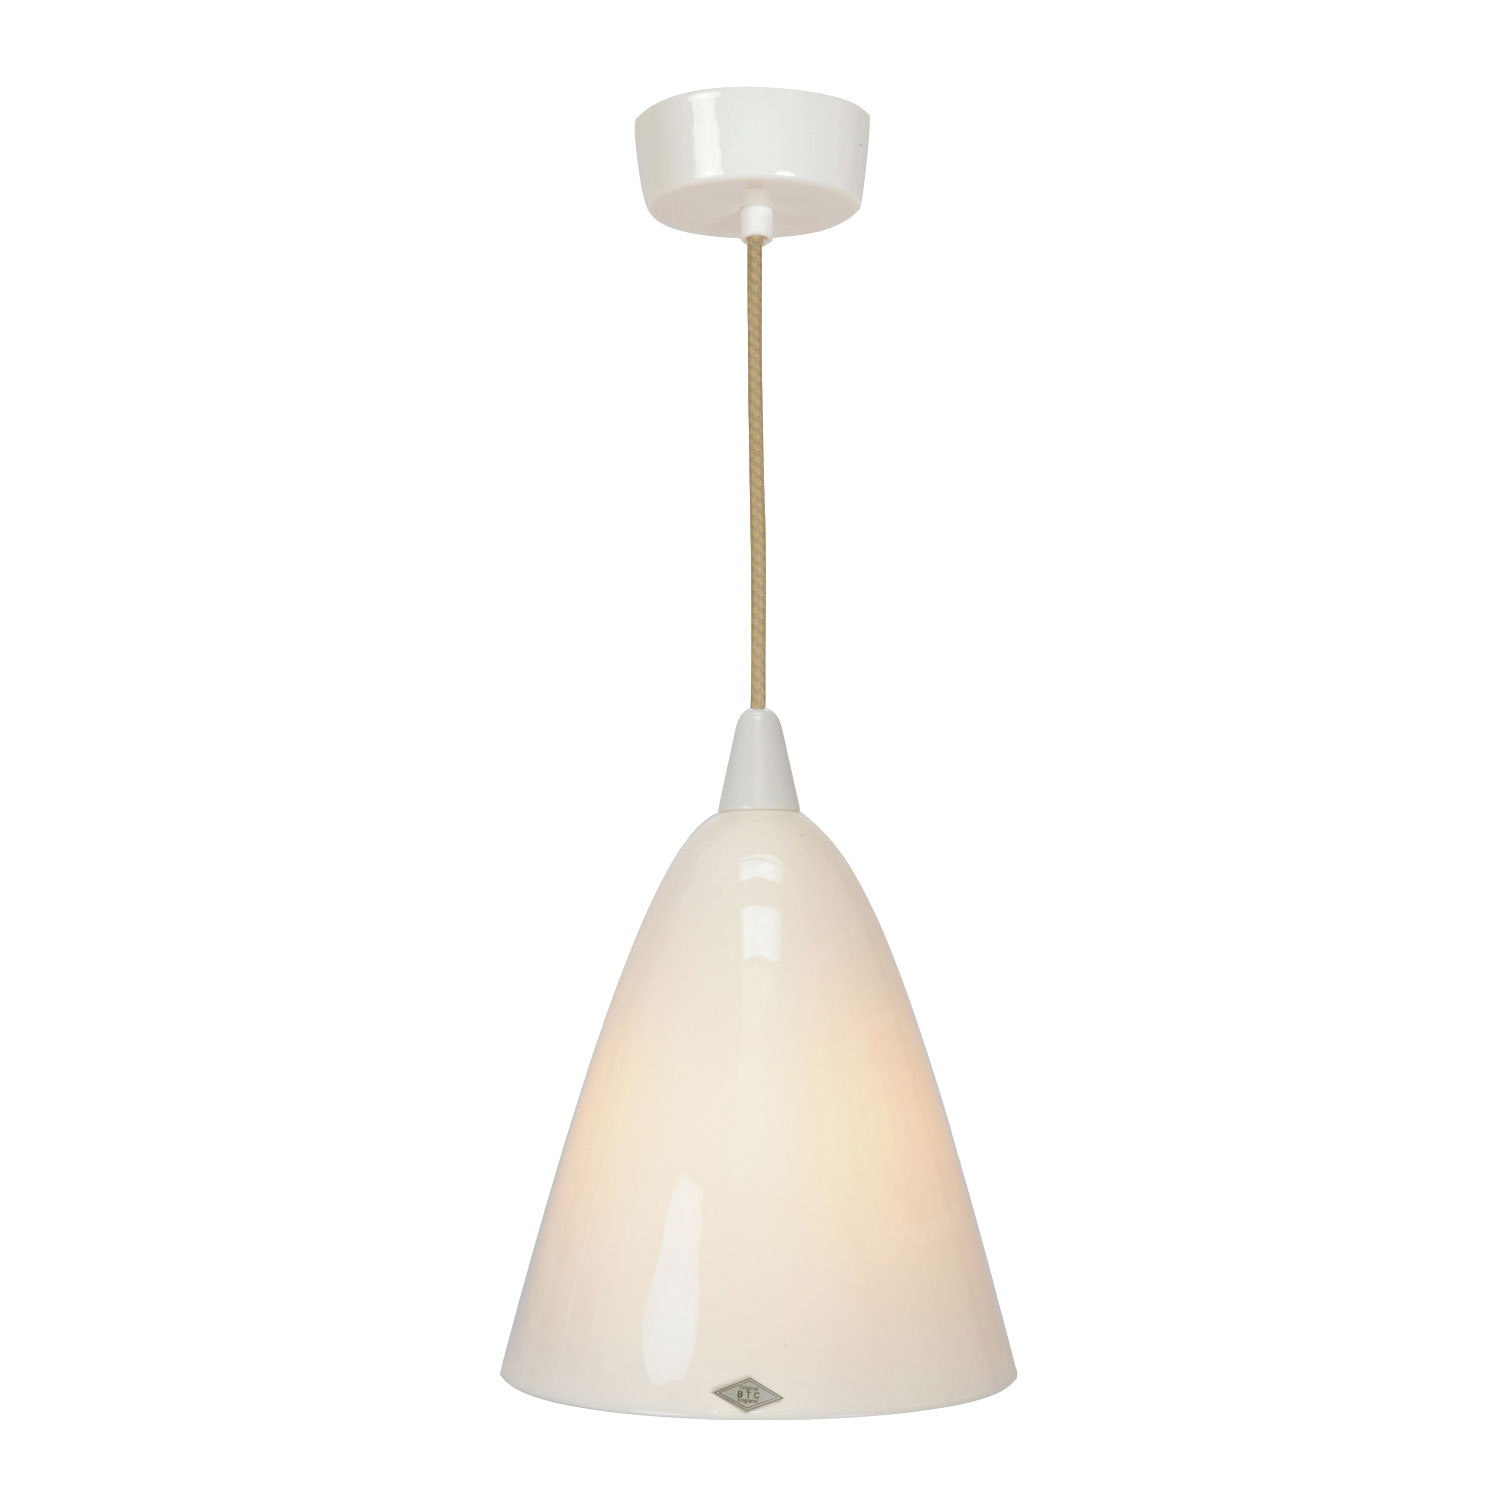 Hector Size 4 Pendant Light, Natural